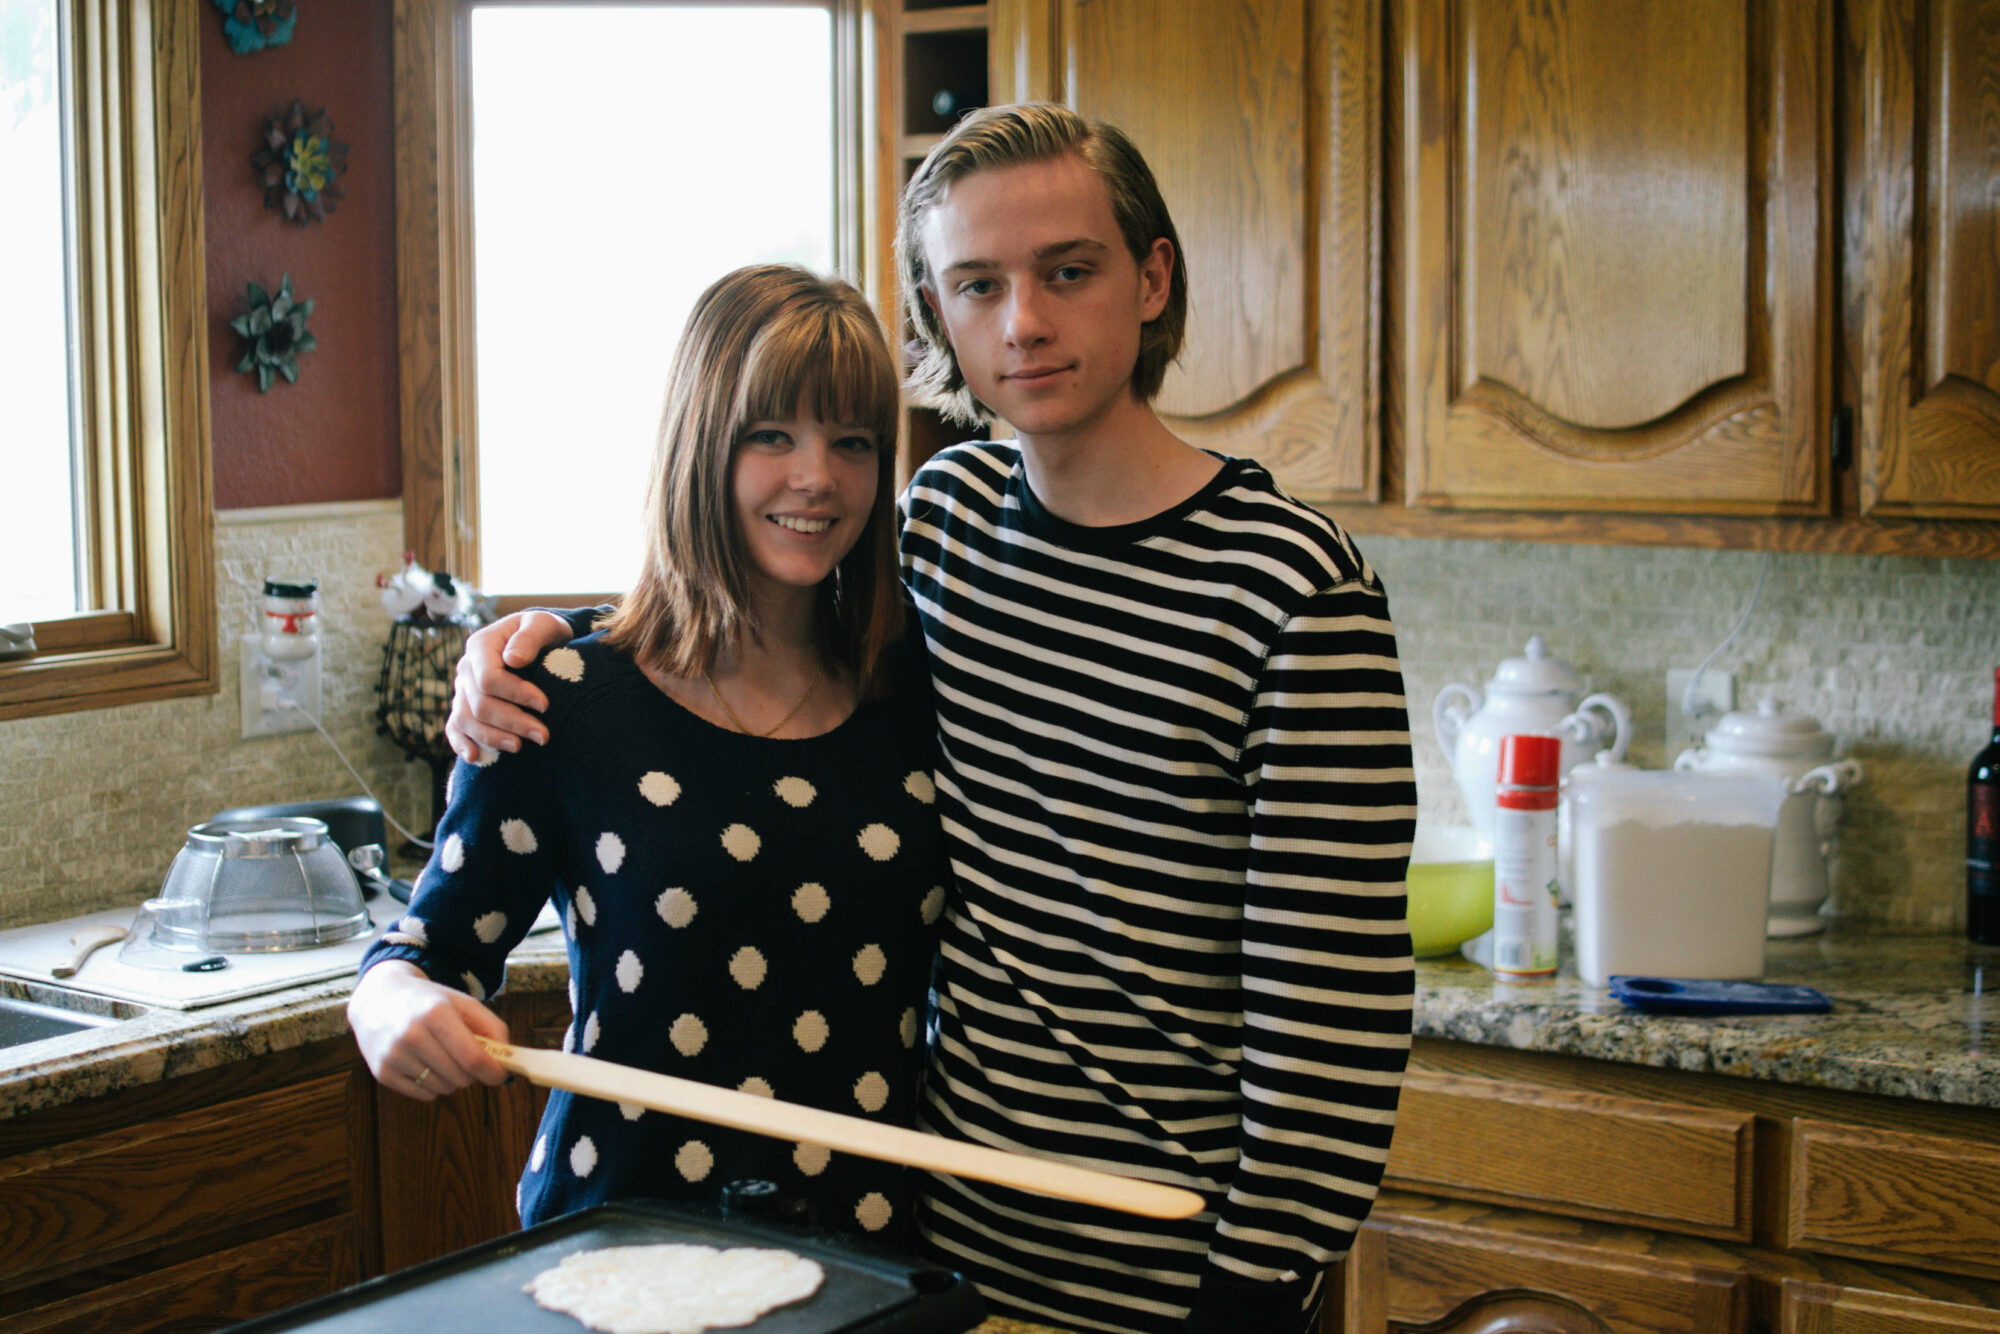 A side image of a woman wearing a navy and white polka dot sweater with her arm around a man wearing a navy and white striped sweater in front of a griddle with potato flatbread.